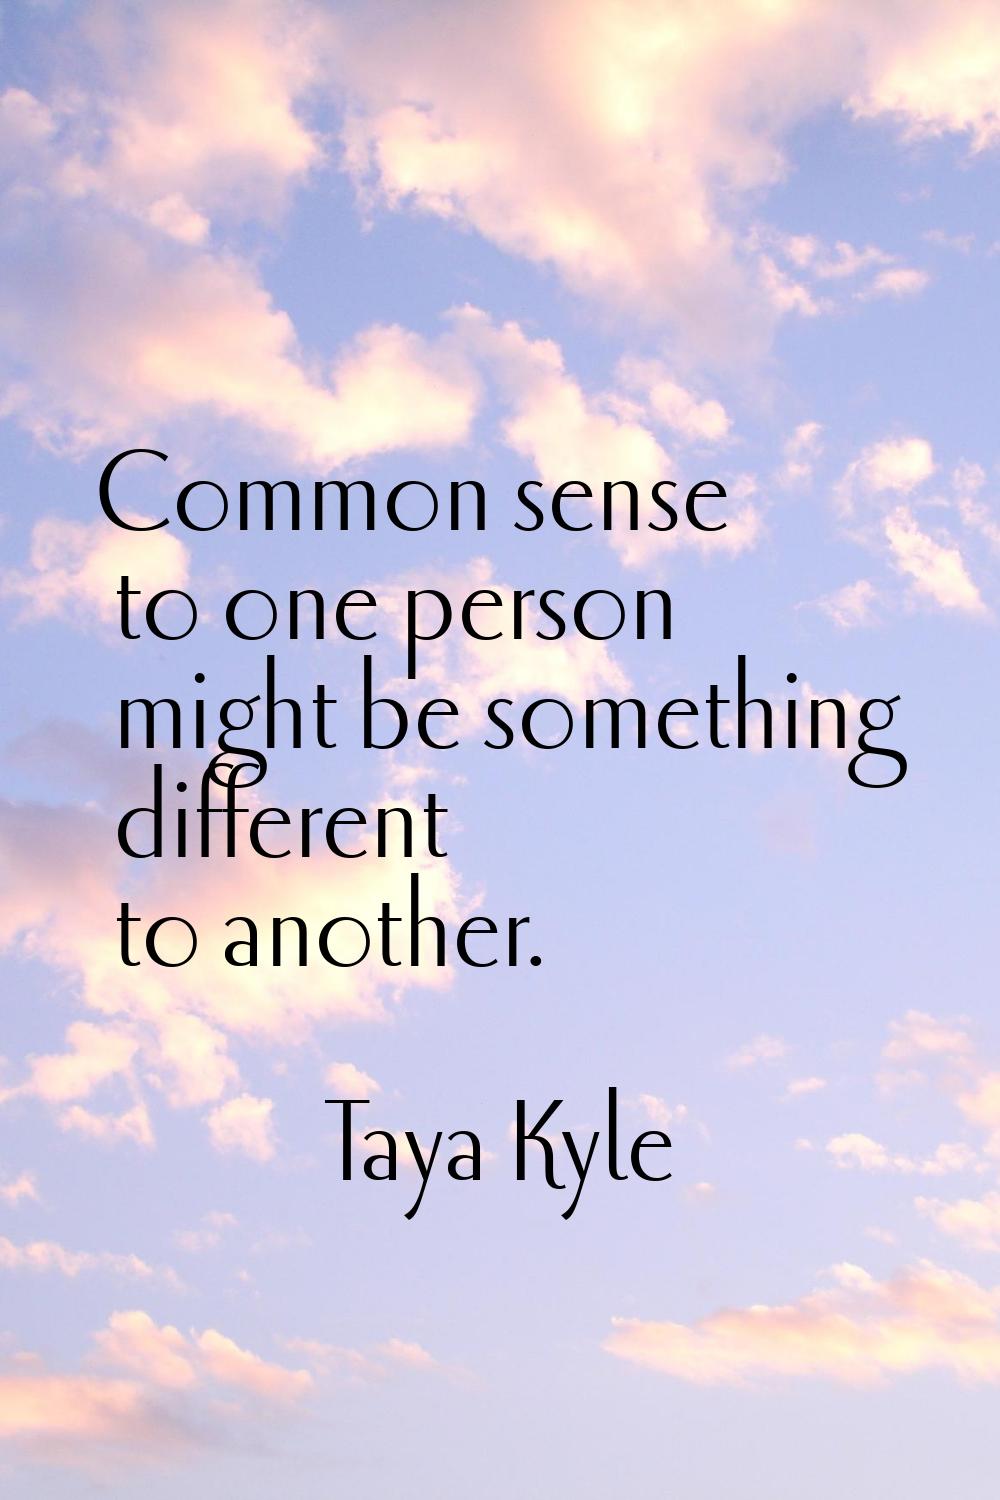 Common sense to one person might be something different to another.